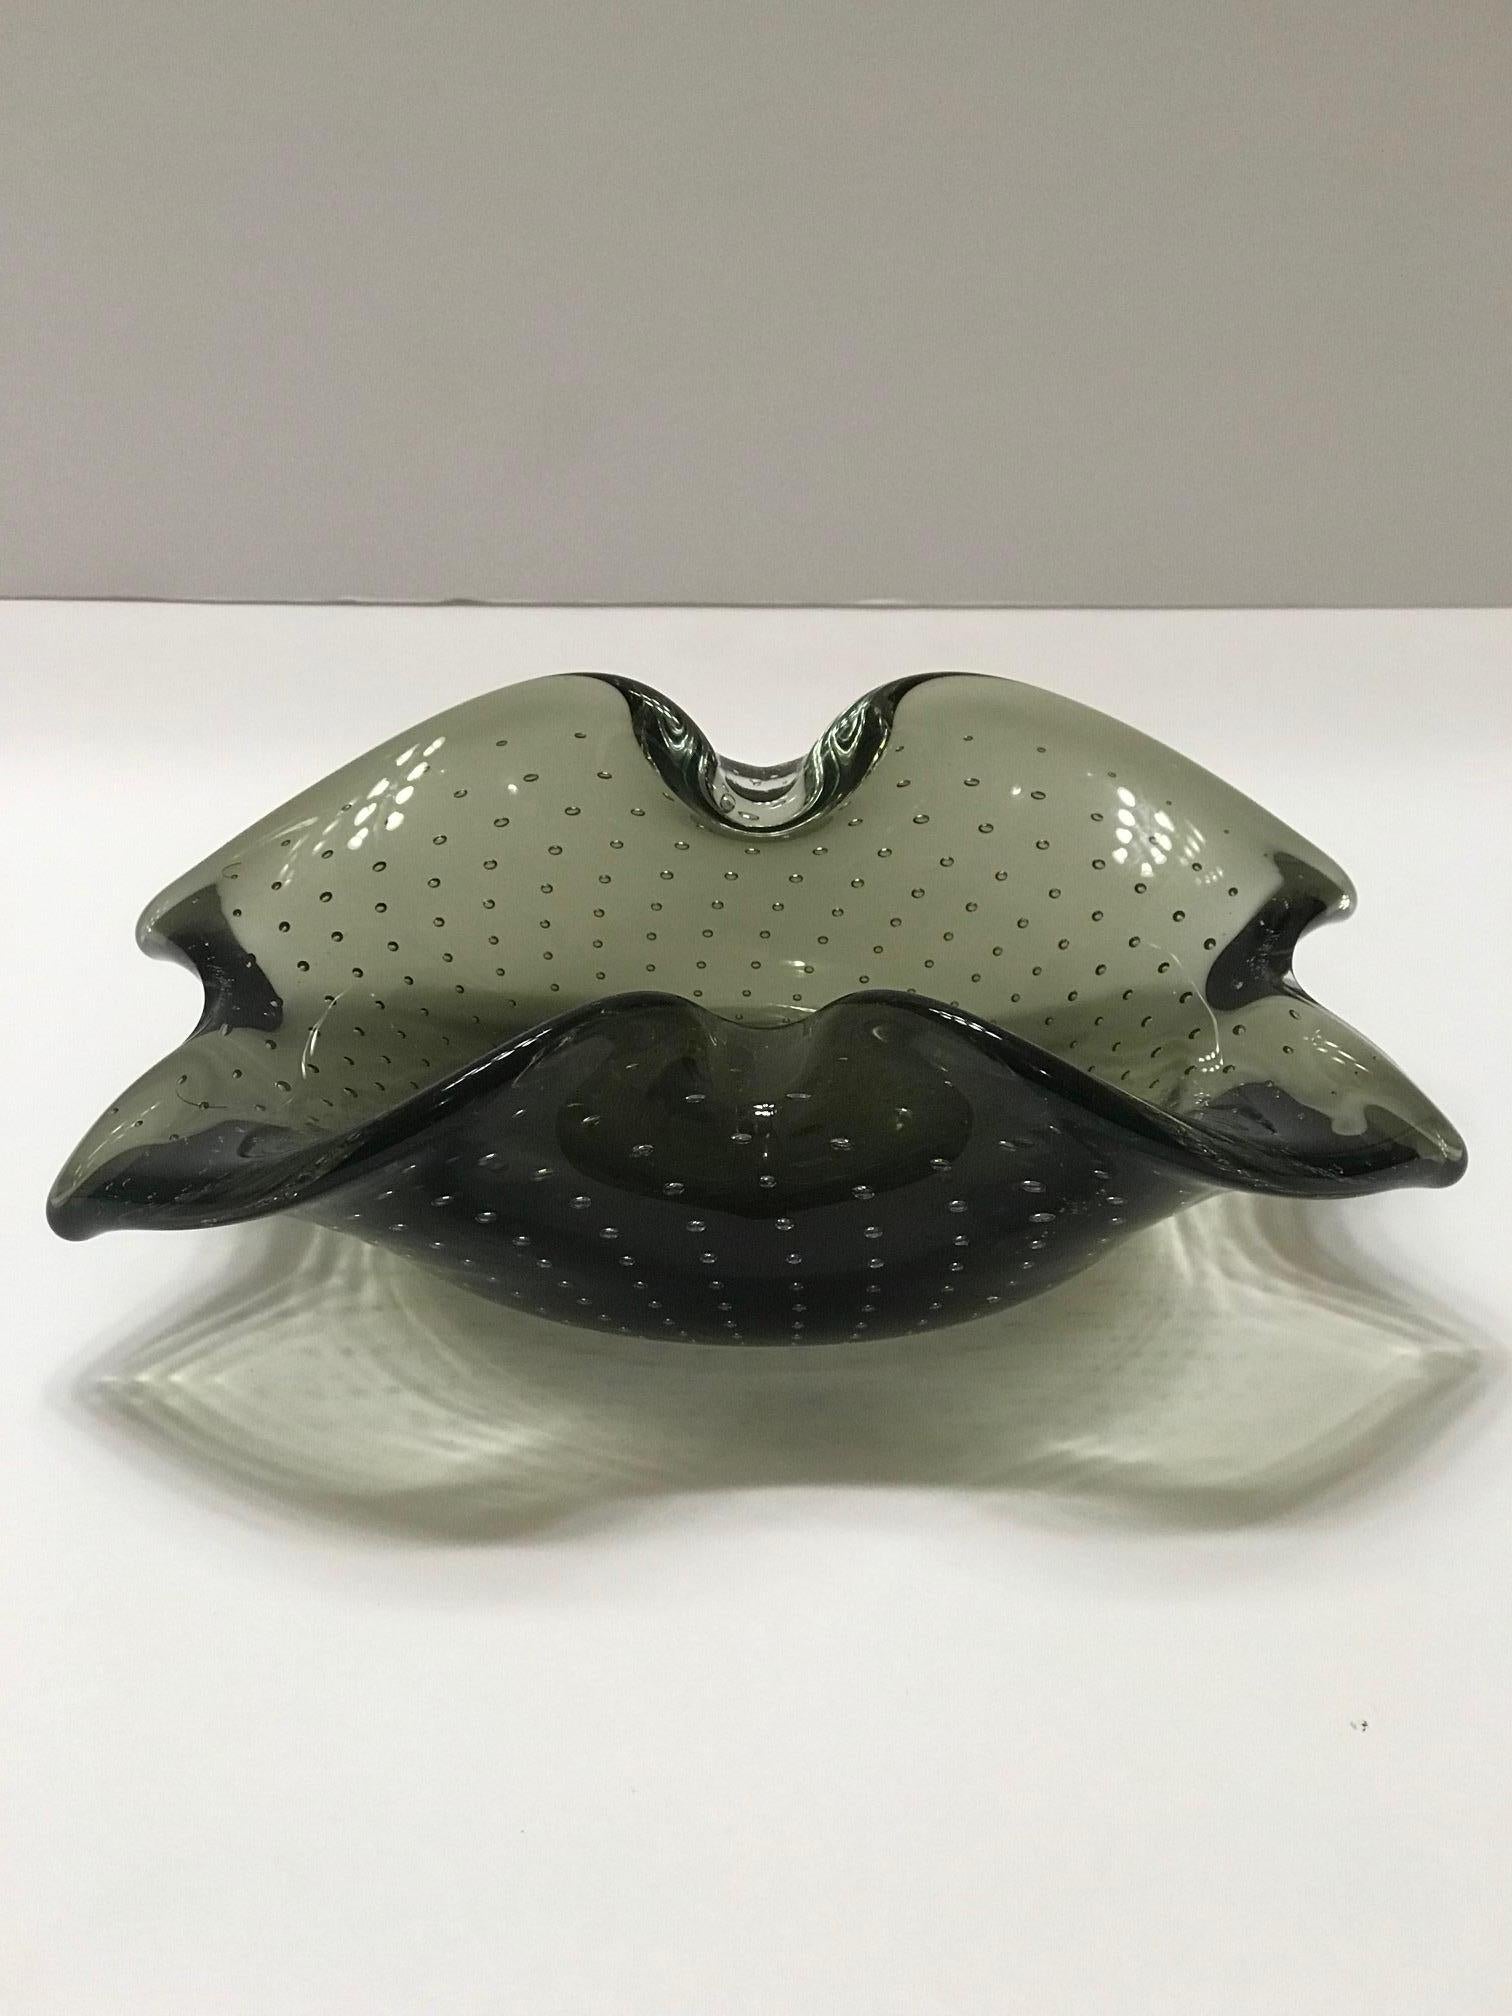 Mid-Century Modern hand blown Murano bowl in smoked grey glass with controlled bubbles. Organic form has floral inspired design also reminiscent of a butterfly. Can function as an ashtray or decorative bowl and is beautiful from all angles.